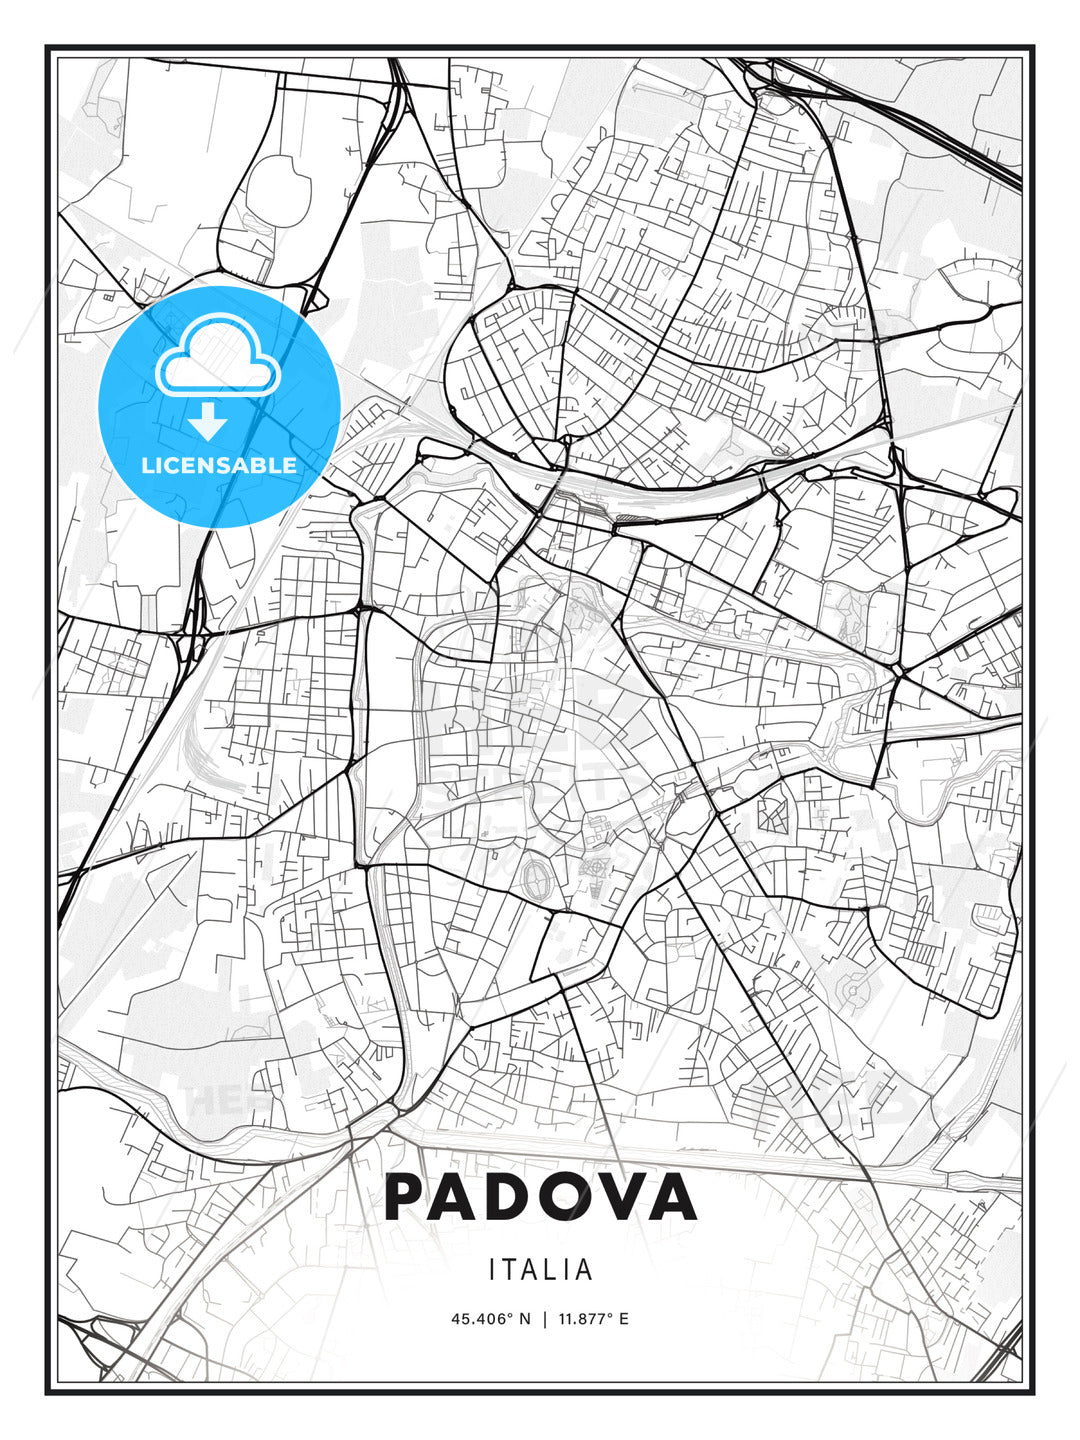 PADOVA / Padua, Italy, Modern Print Template in Various Formats - HEBSTREITS Sketches